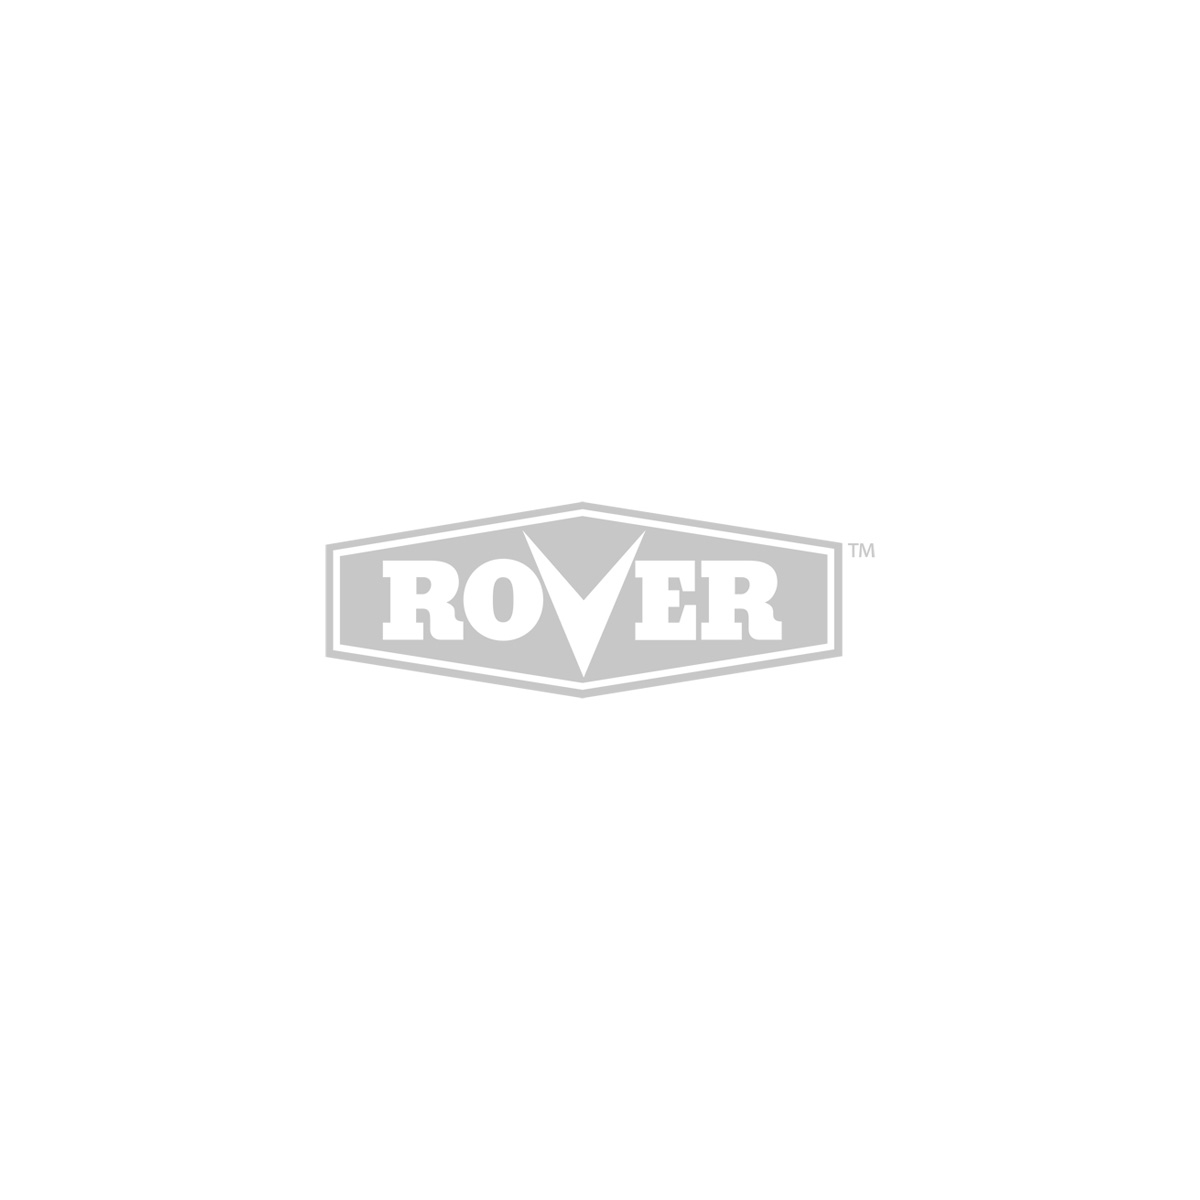 Rover Snorkle Air Filter